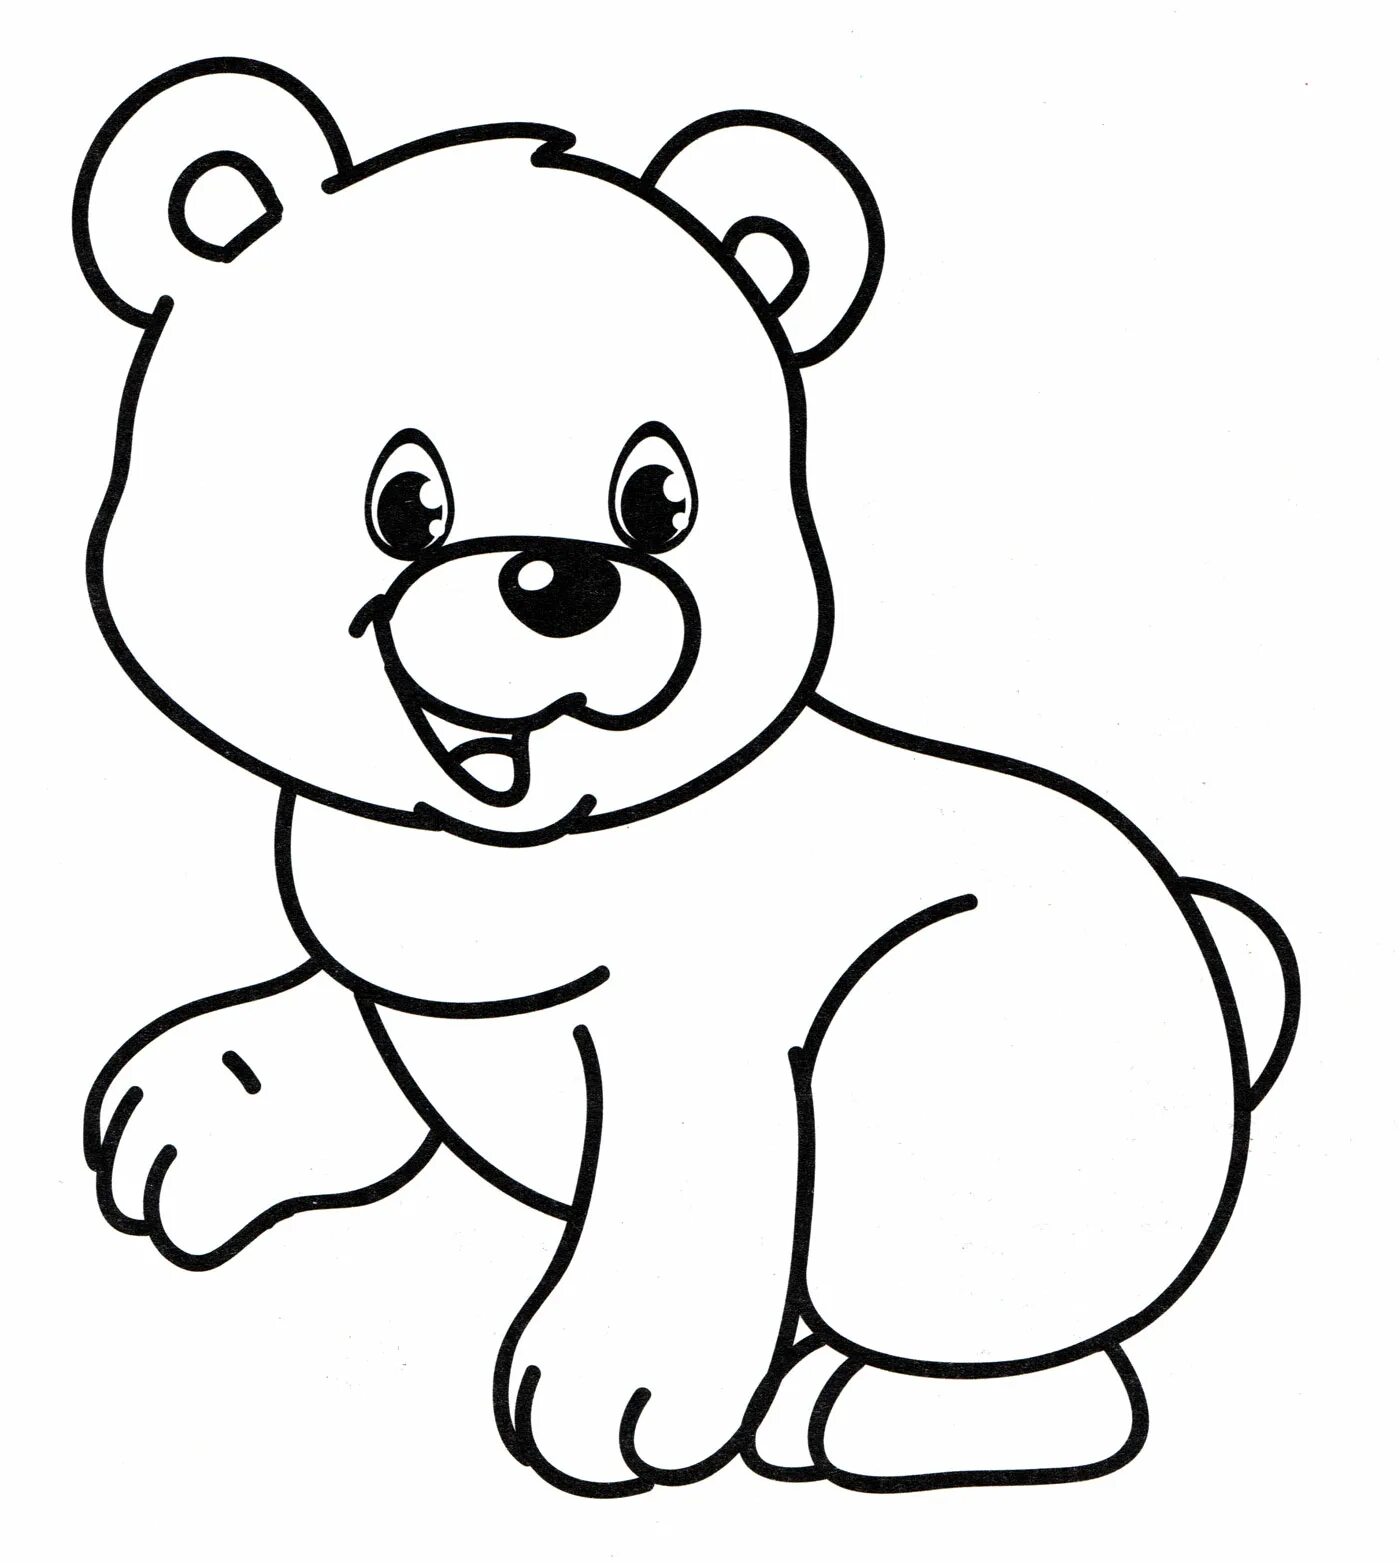 Glowing polar bear coloring book for 3-4 year olds